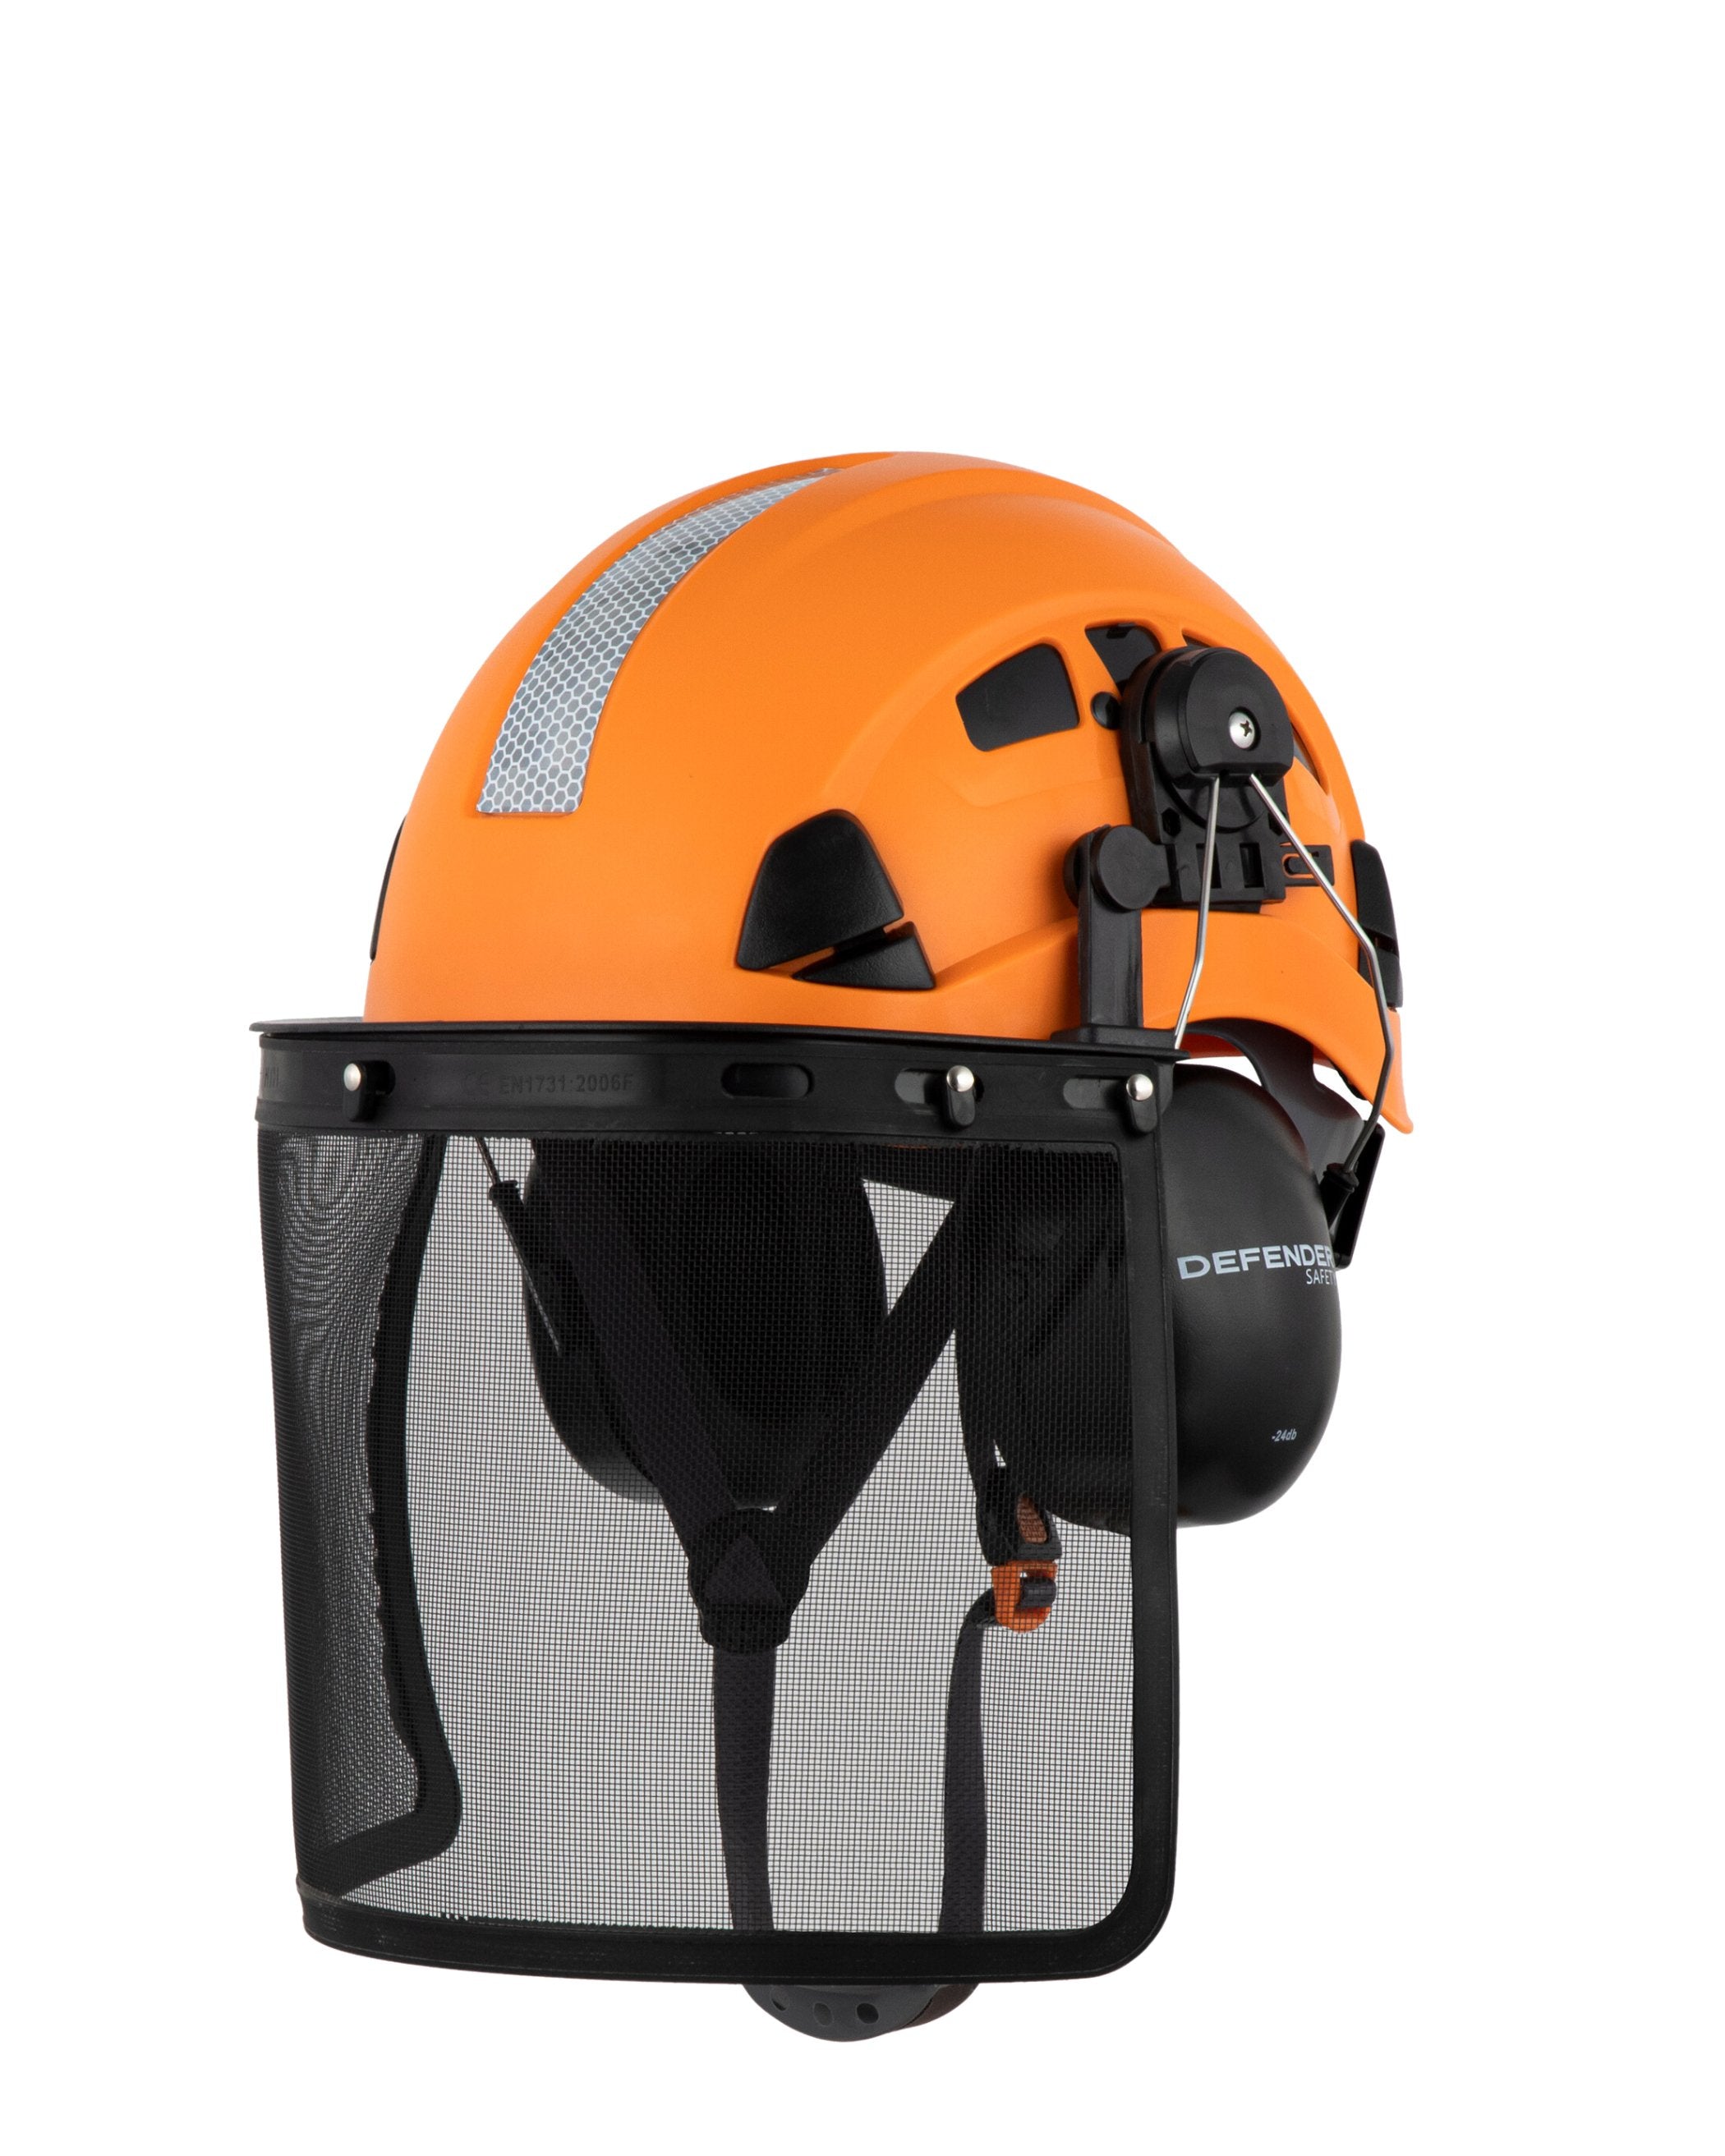 H1-CH Arborist Helmet for Forestry/Tree Safety + Hearing Protection - Defender Safety